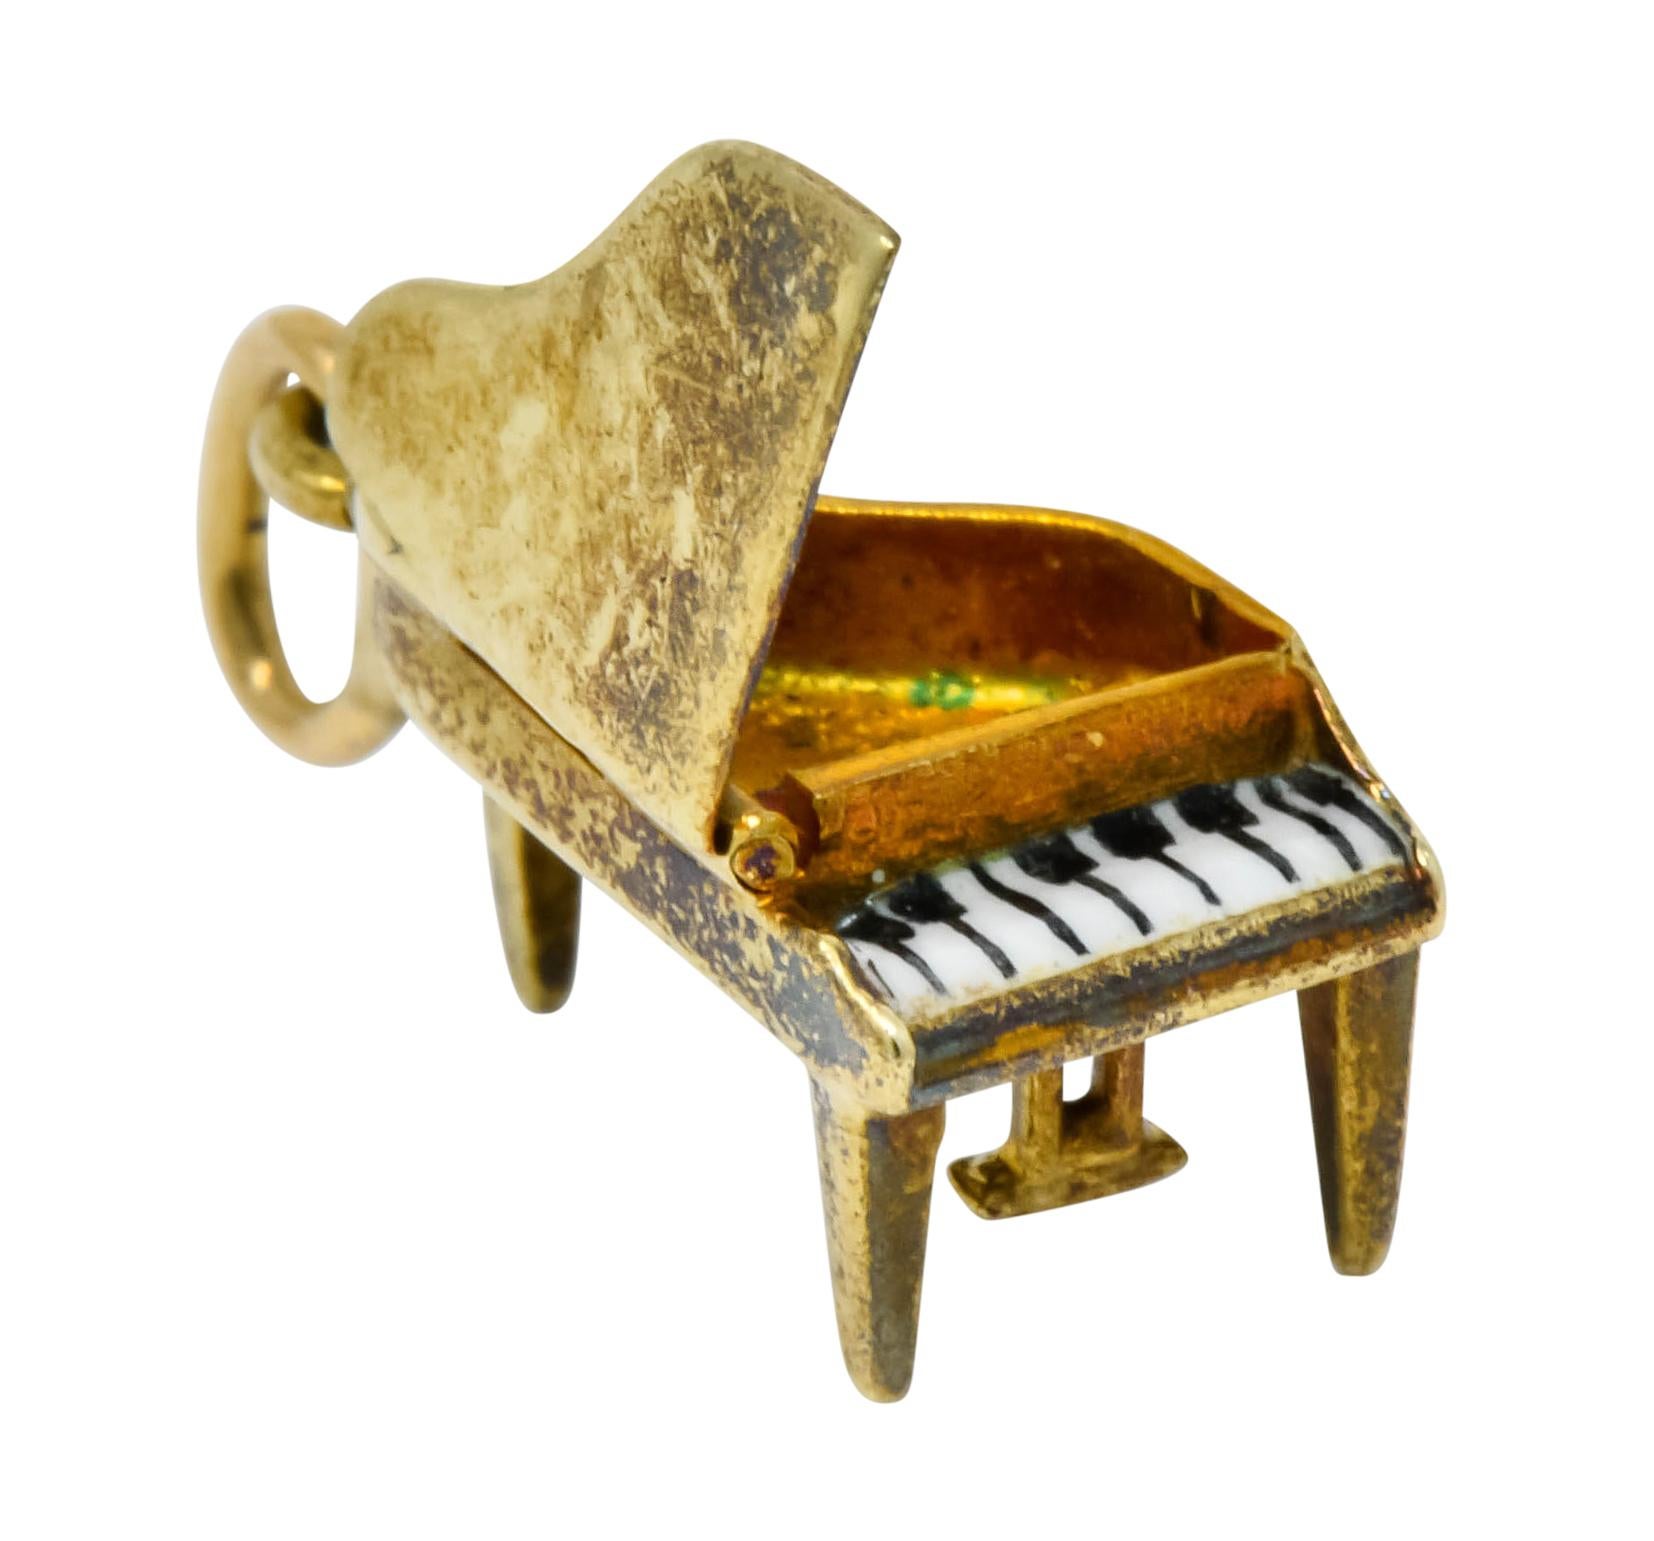 Charm designed a piano with stylized glossy black and white enamel keys

Hinged piano lid lifts up to reveal two bright red enamel hearts

Stamped 14KT for 14 karat gold

Completed by jump ring bale

Circa: 1950s

Measures: 3/4 x 5/16 inch

Total